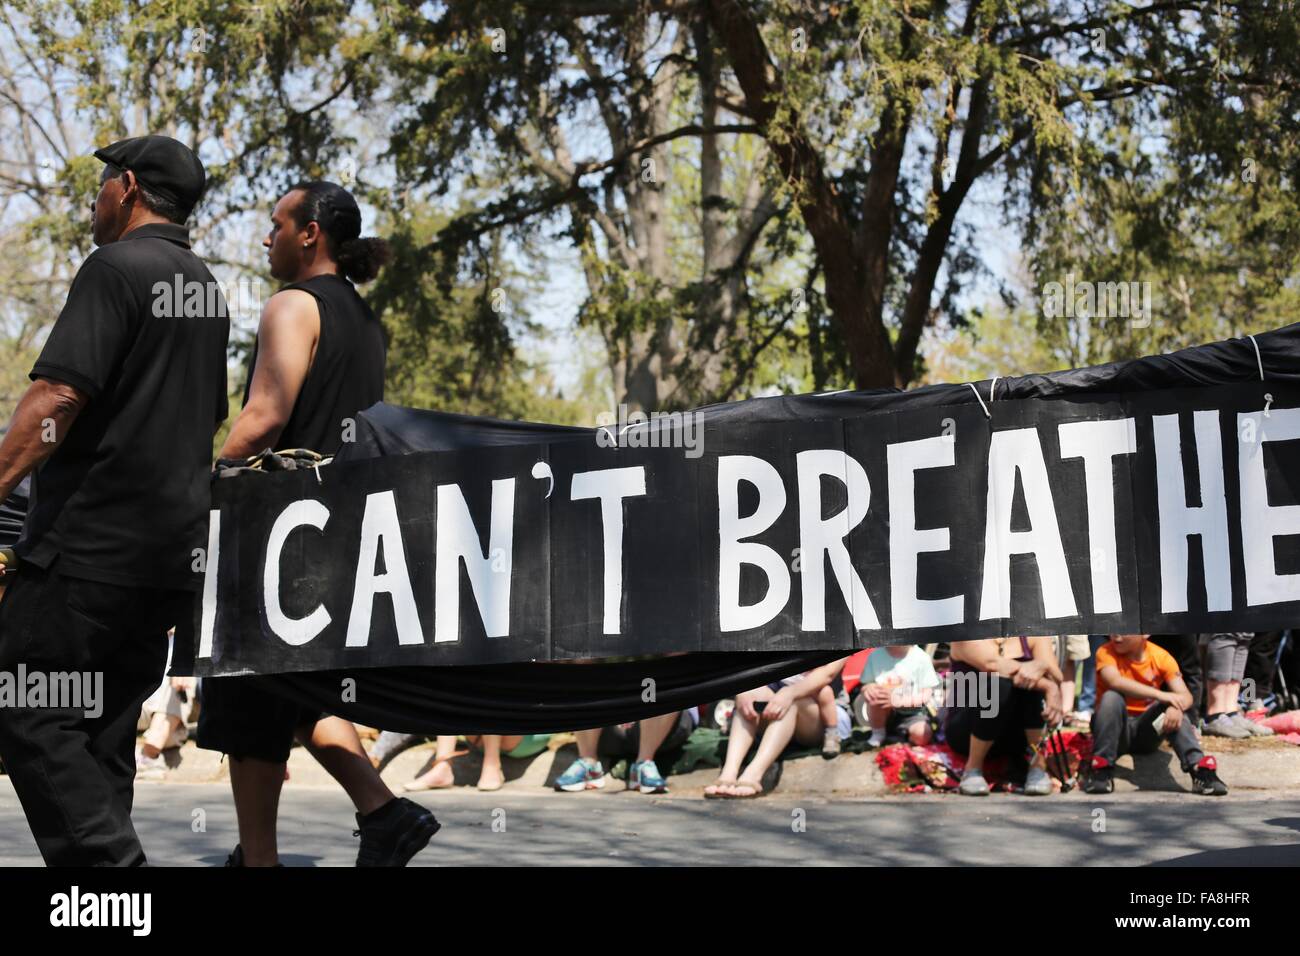 African American people protesting death of black men by police, carrying a banner reading "I can't breathe" in Minneapolis. Stock Photo